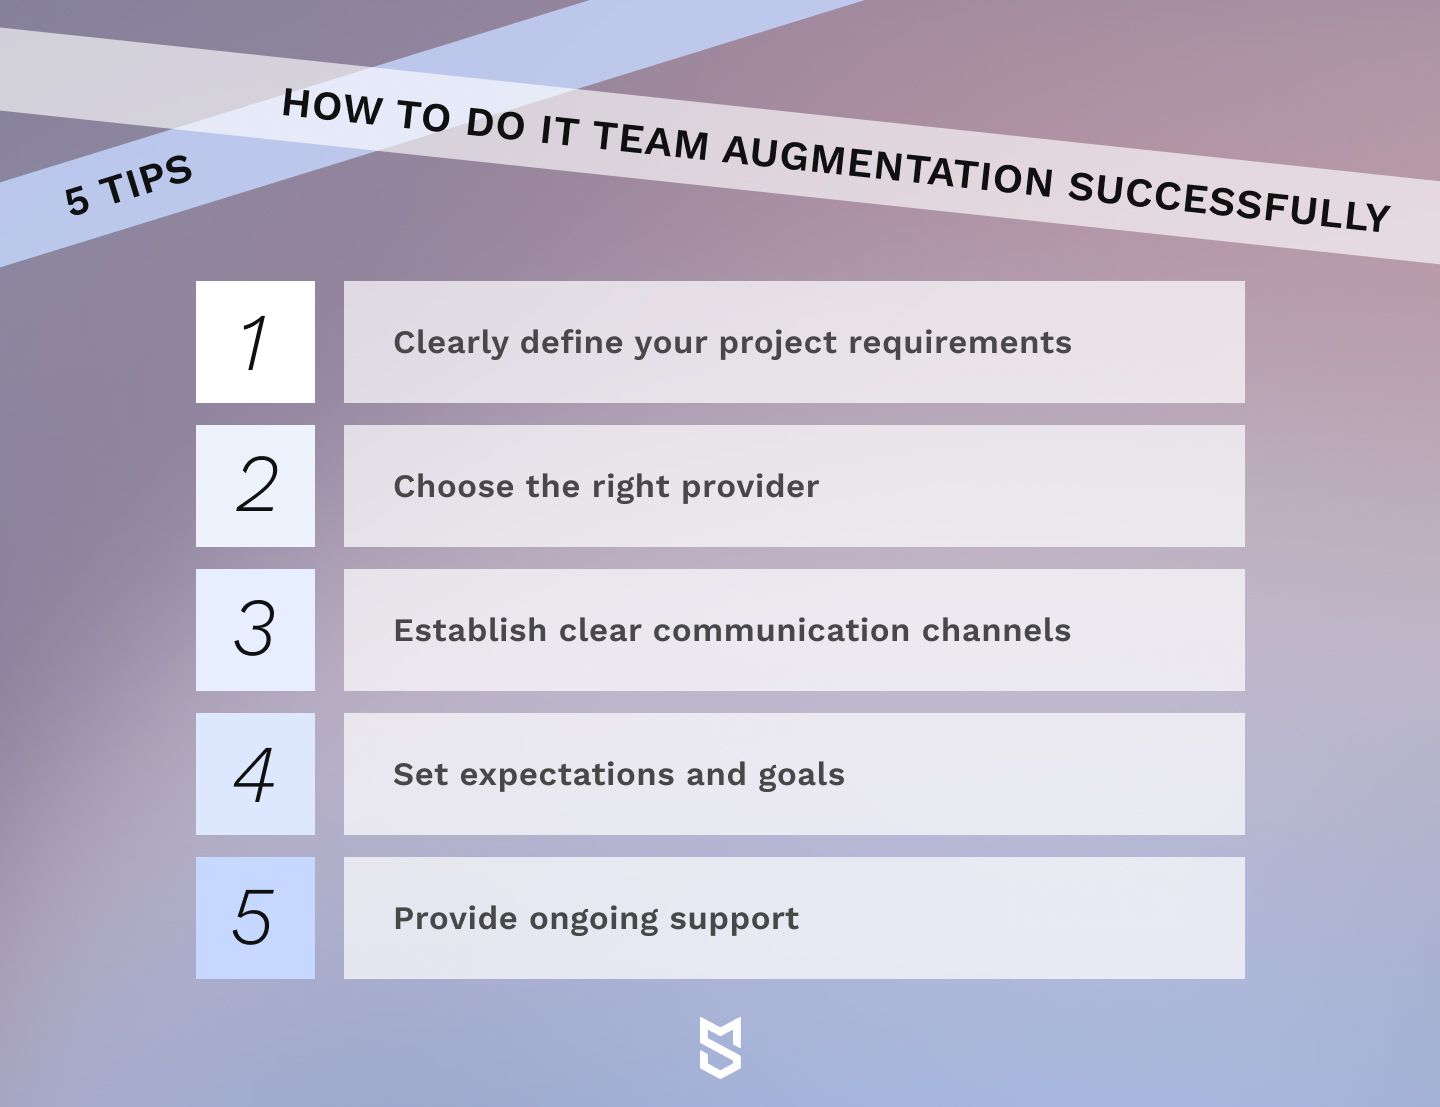 How to do IT team augmentation successfully: 5 tips